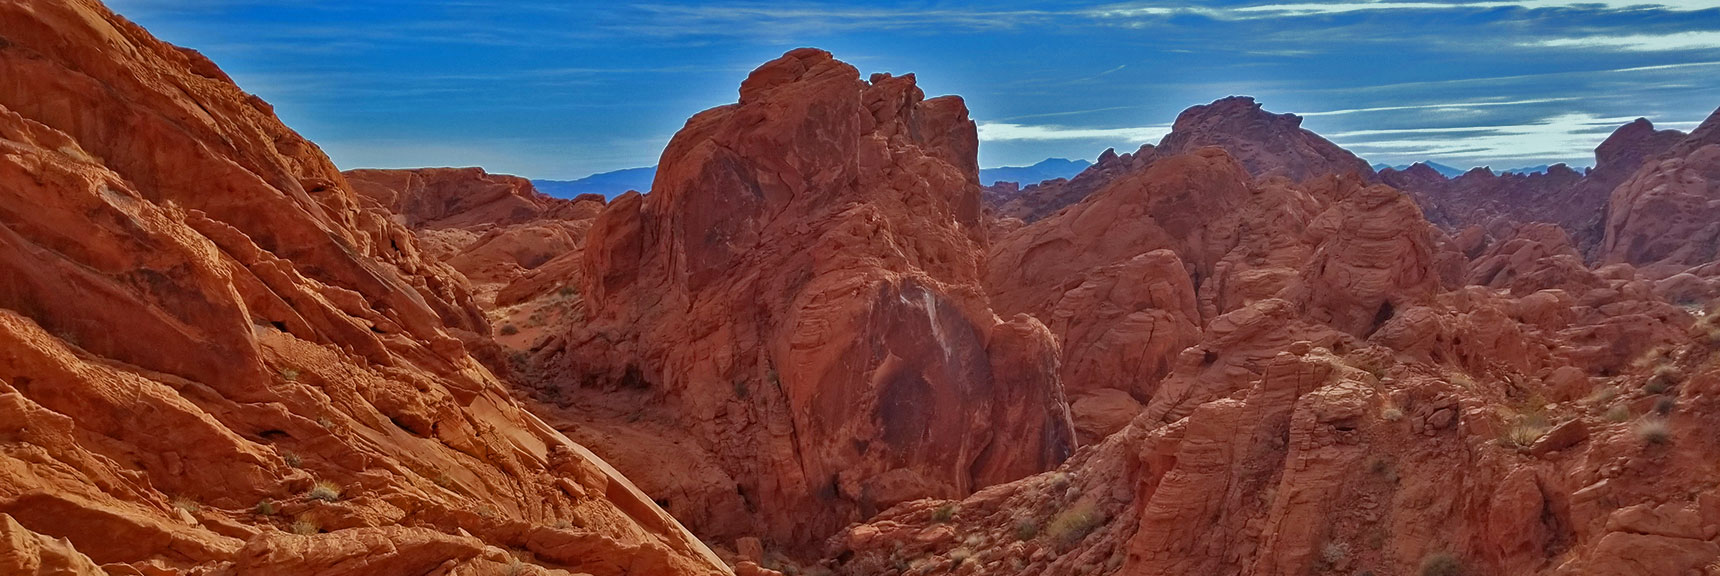 Fire Canyon in Valley of Fire State Park, Nevada, Overlook on the Rainbow Vista Trail